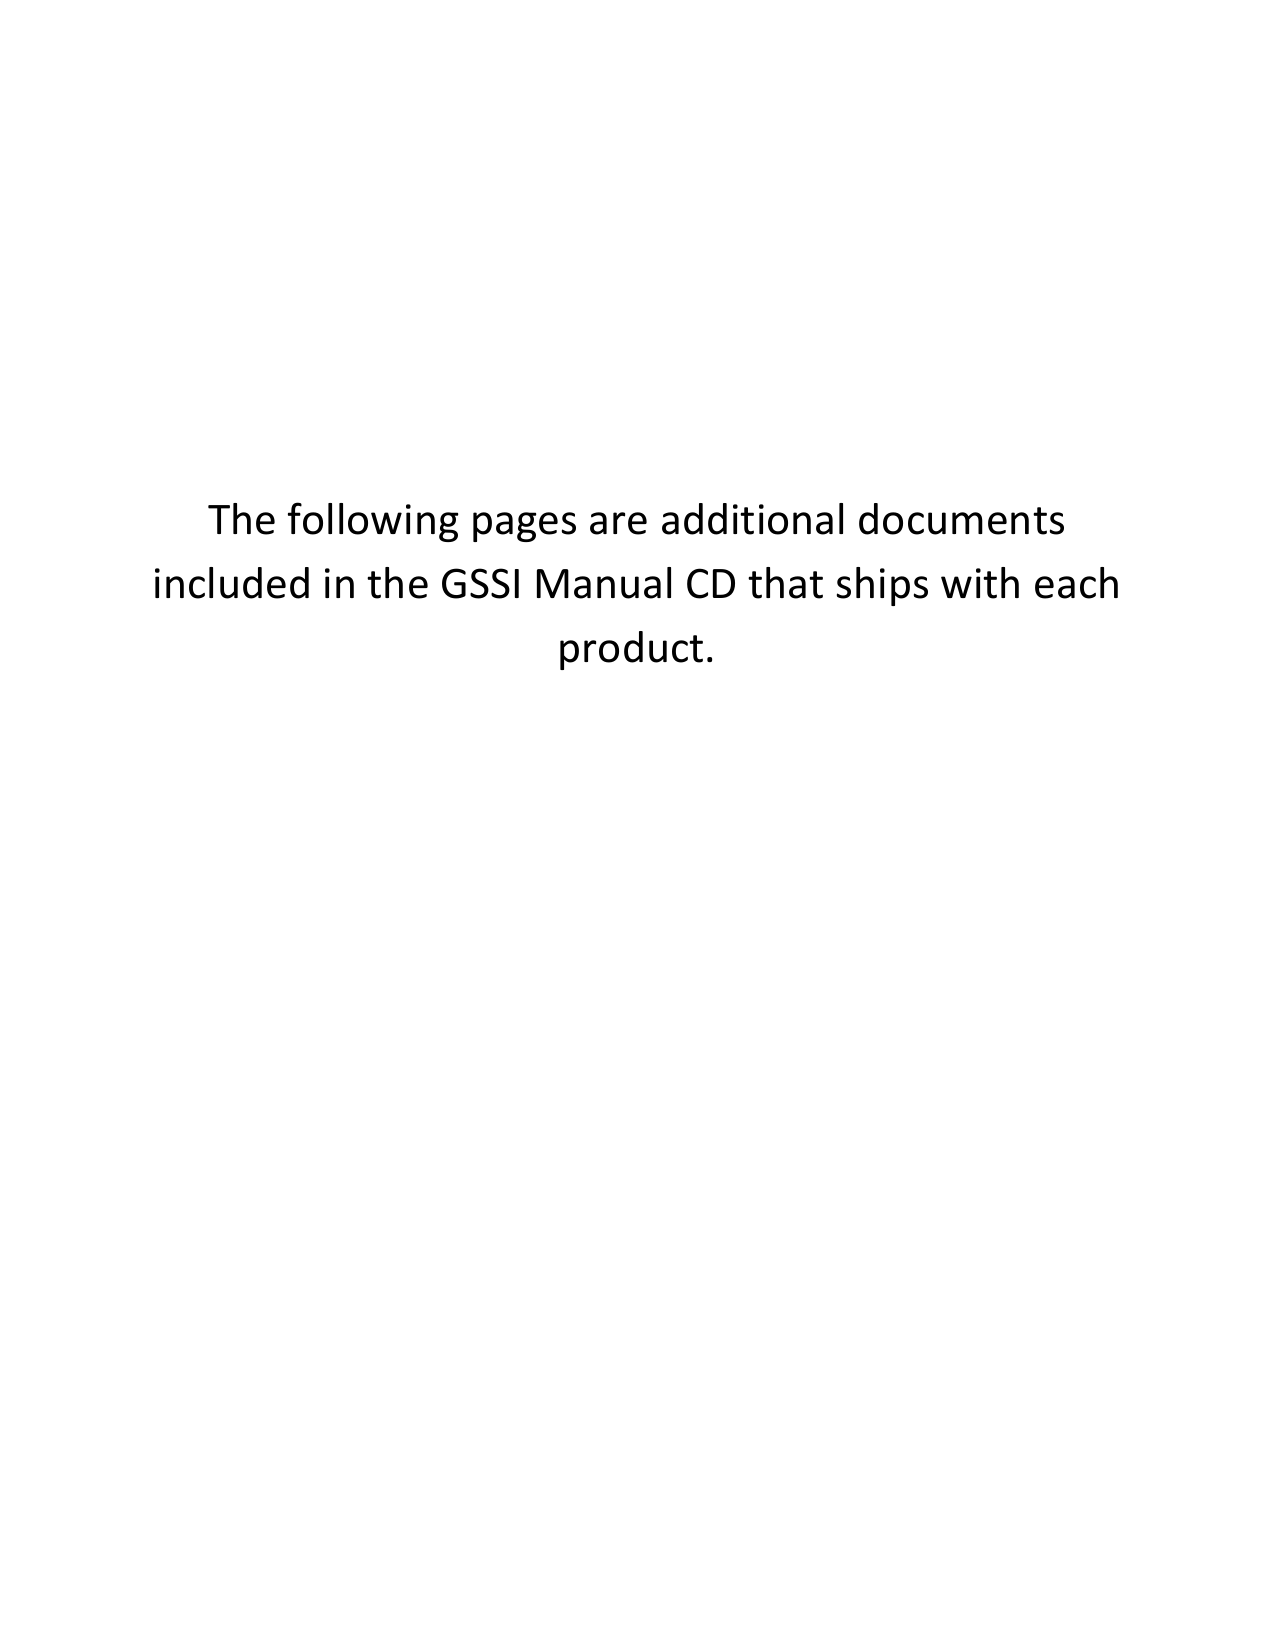     The following pages are additional documents included in the GSSI Manual CD that ships with each product. 